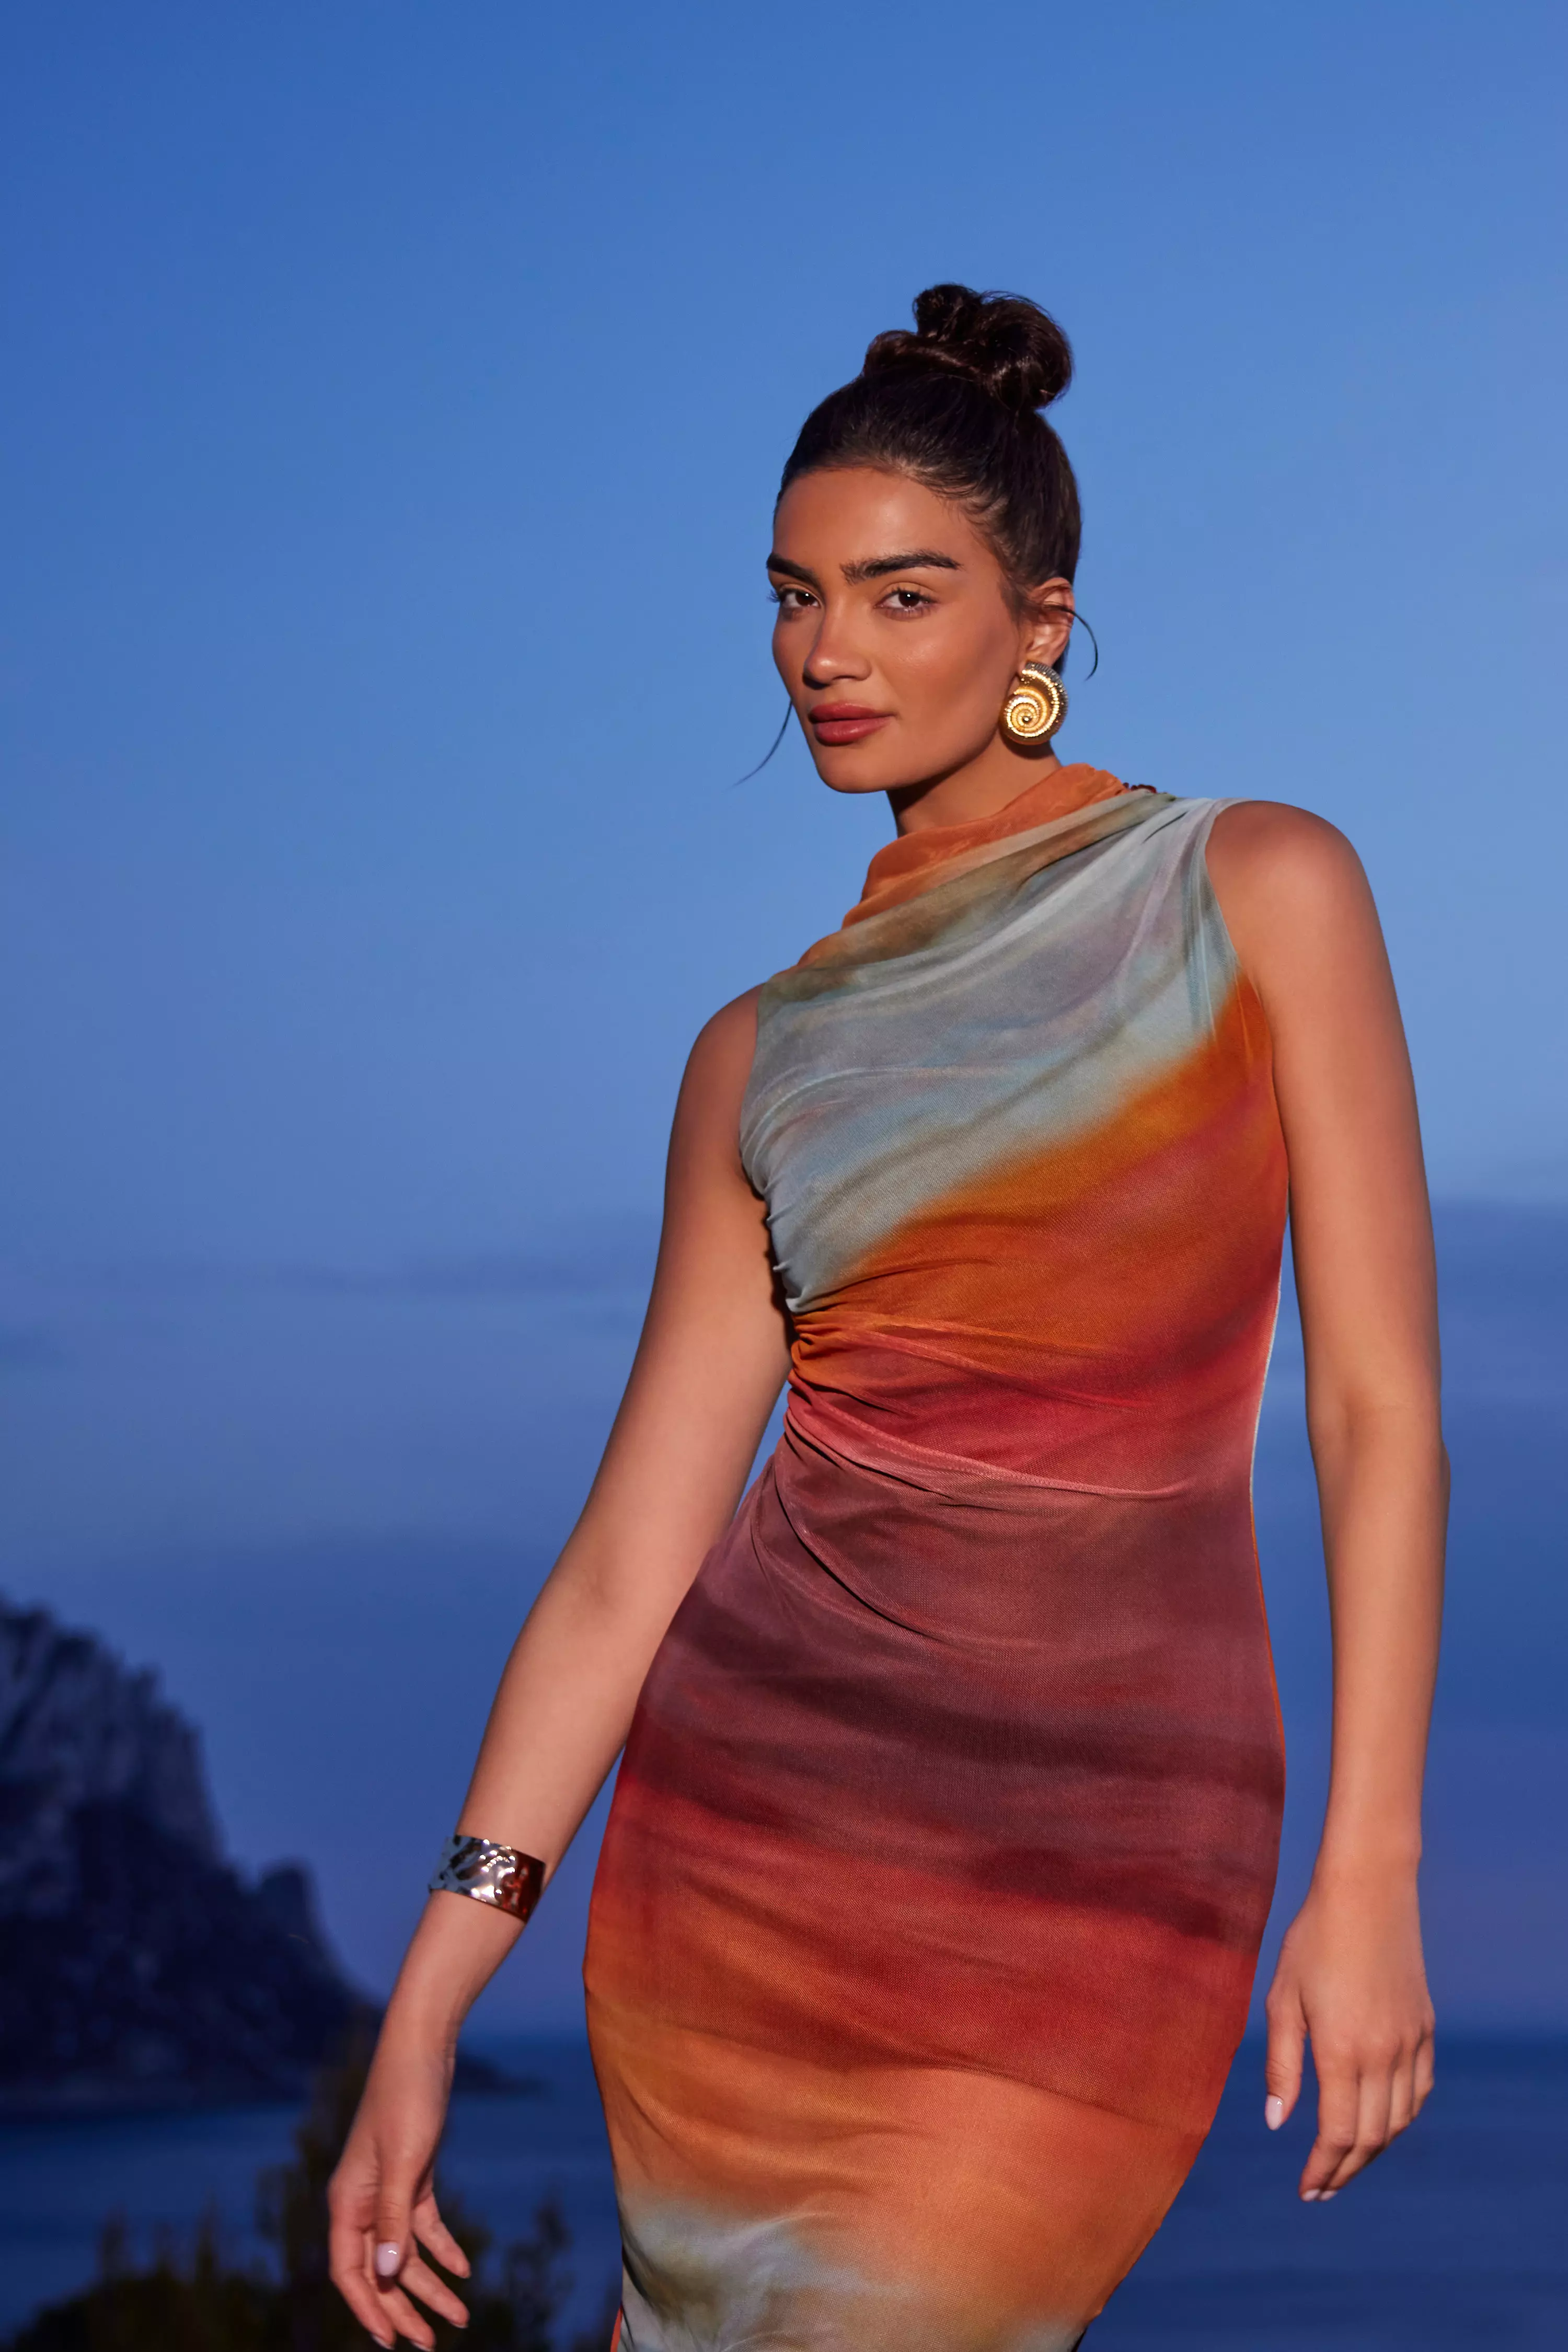 Orange Ombre Print Ruched Midaxi Dress